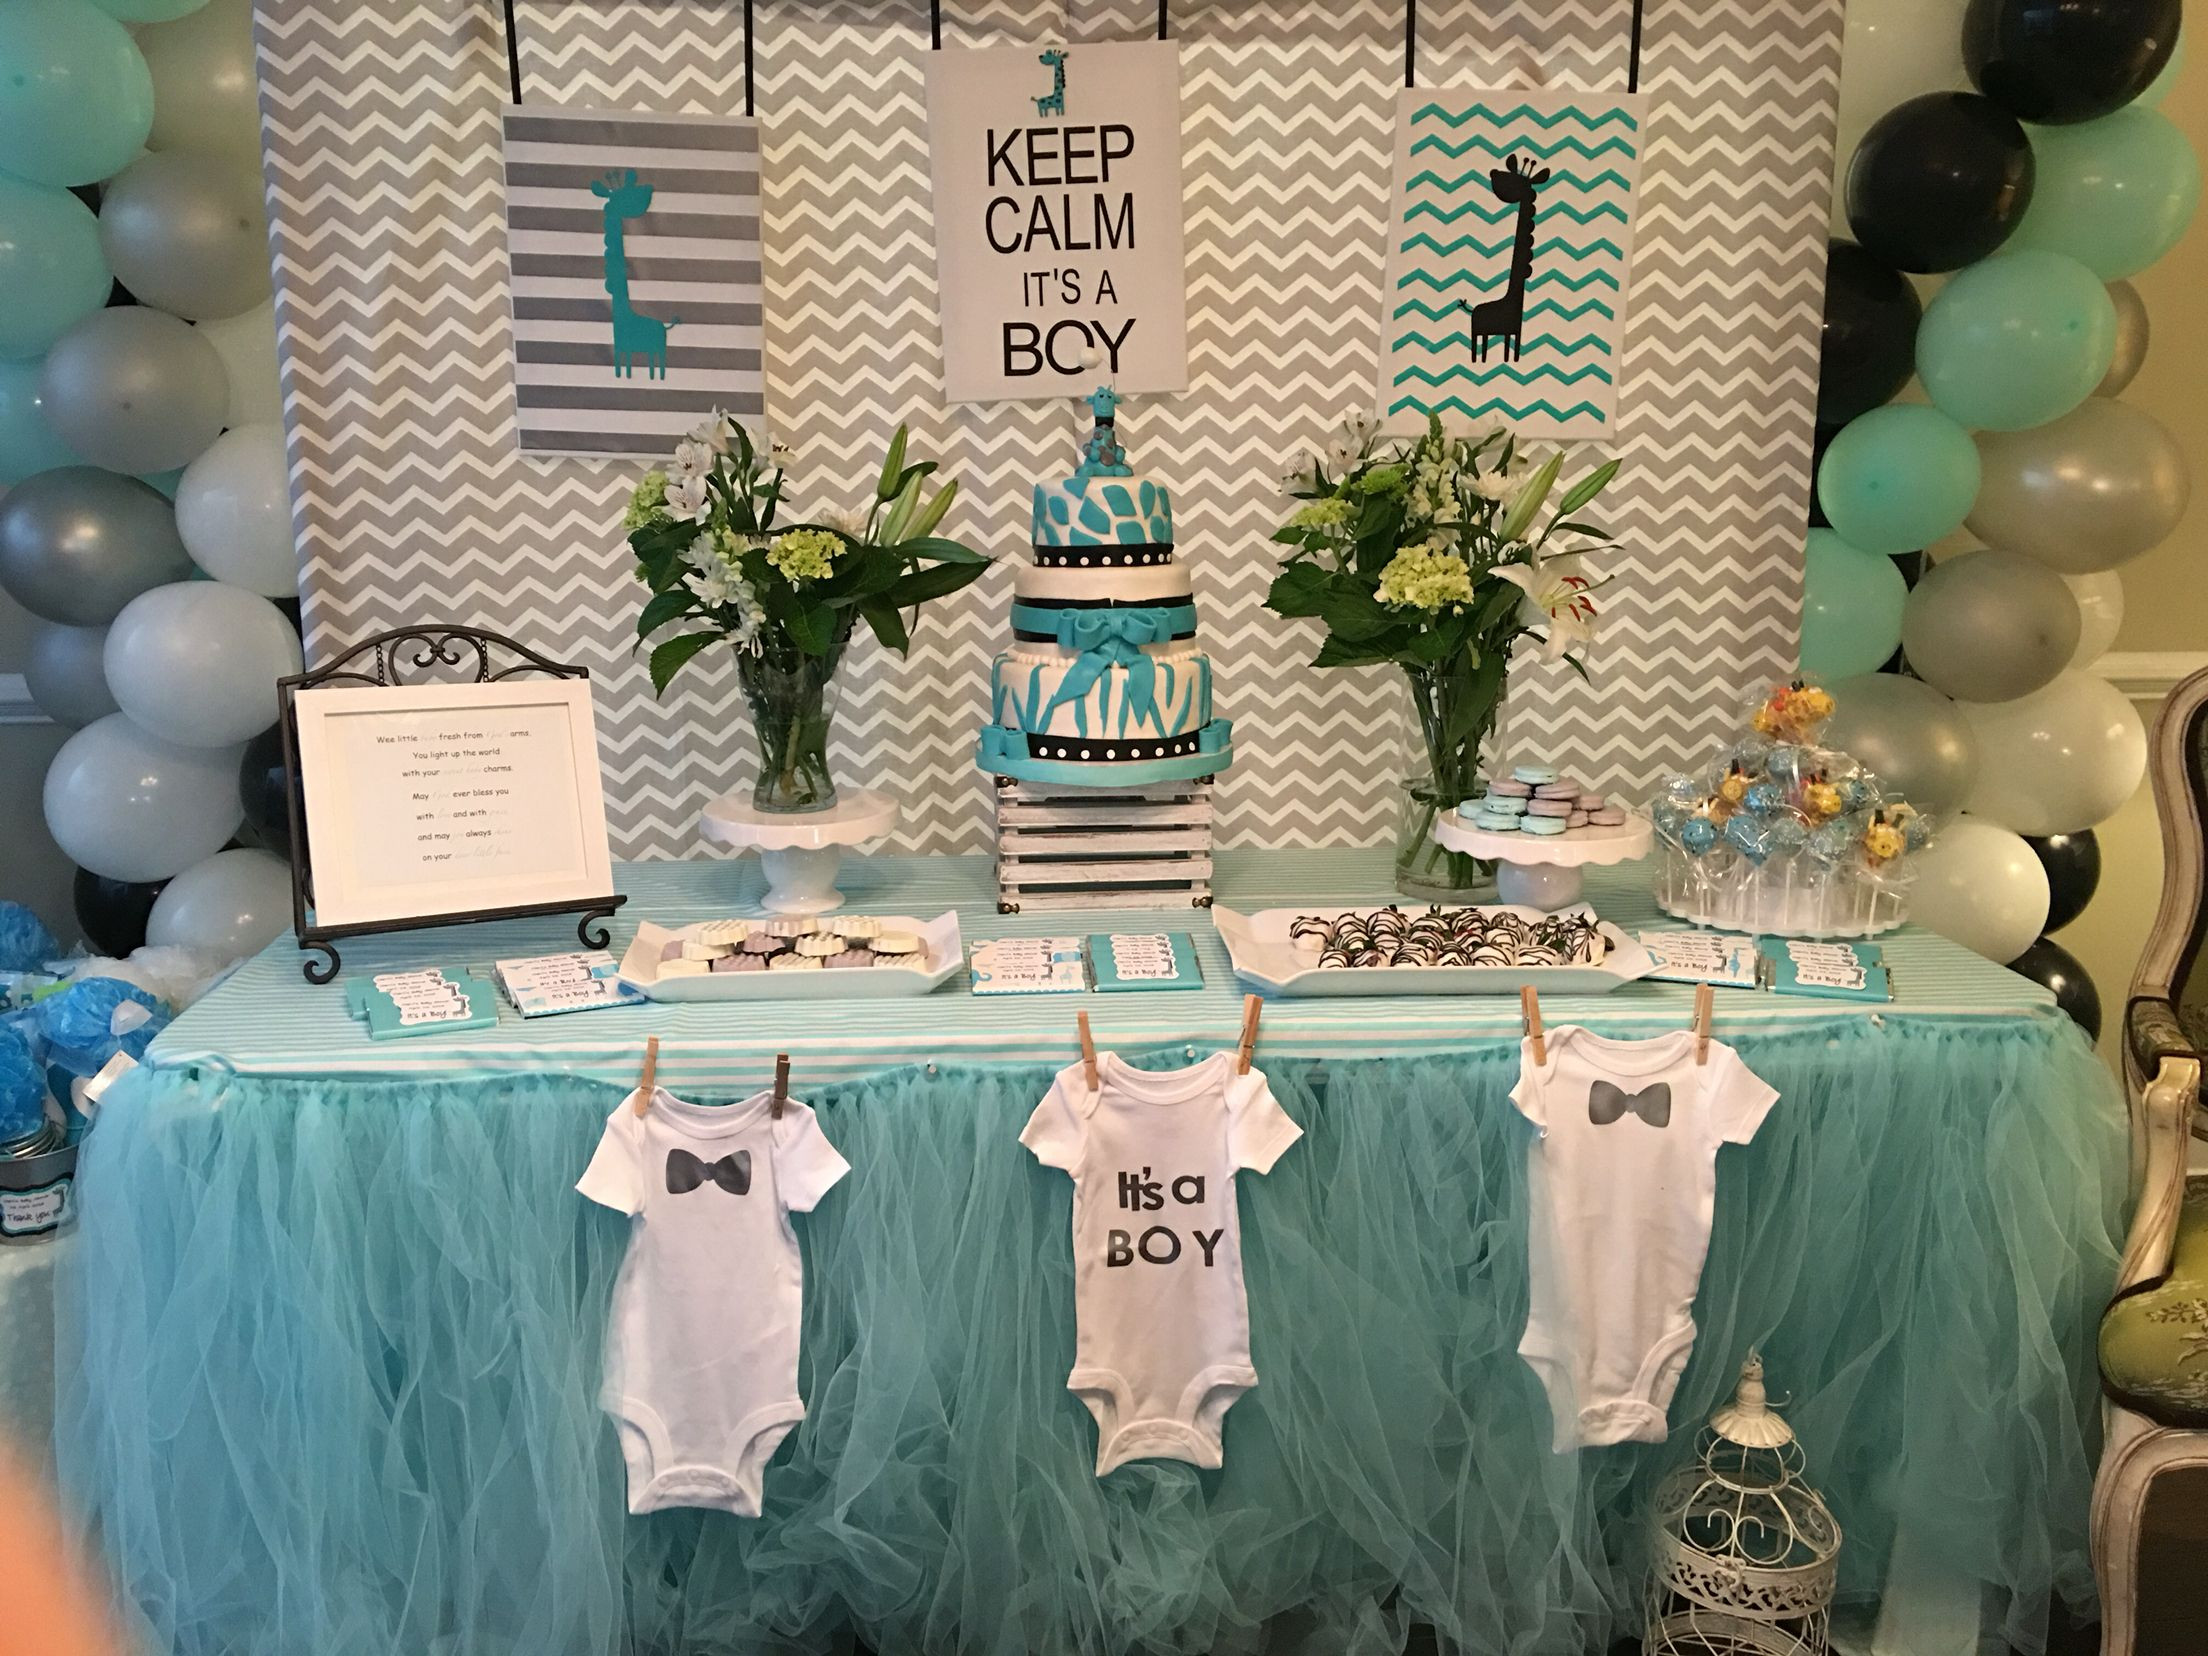 Baby Shower Decoration Ideas For A Boy
 Uptown giraffe themed baby shower decorations